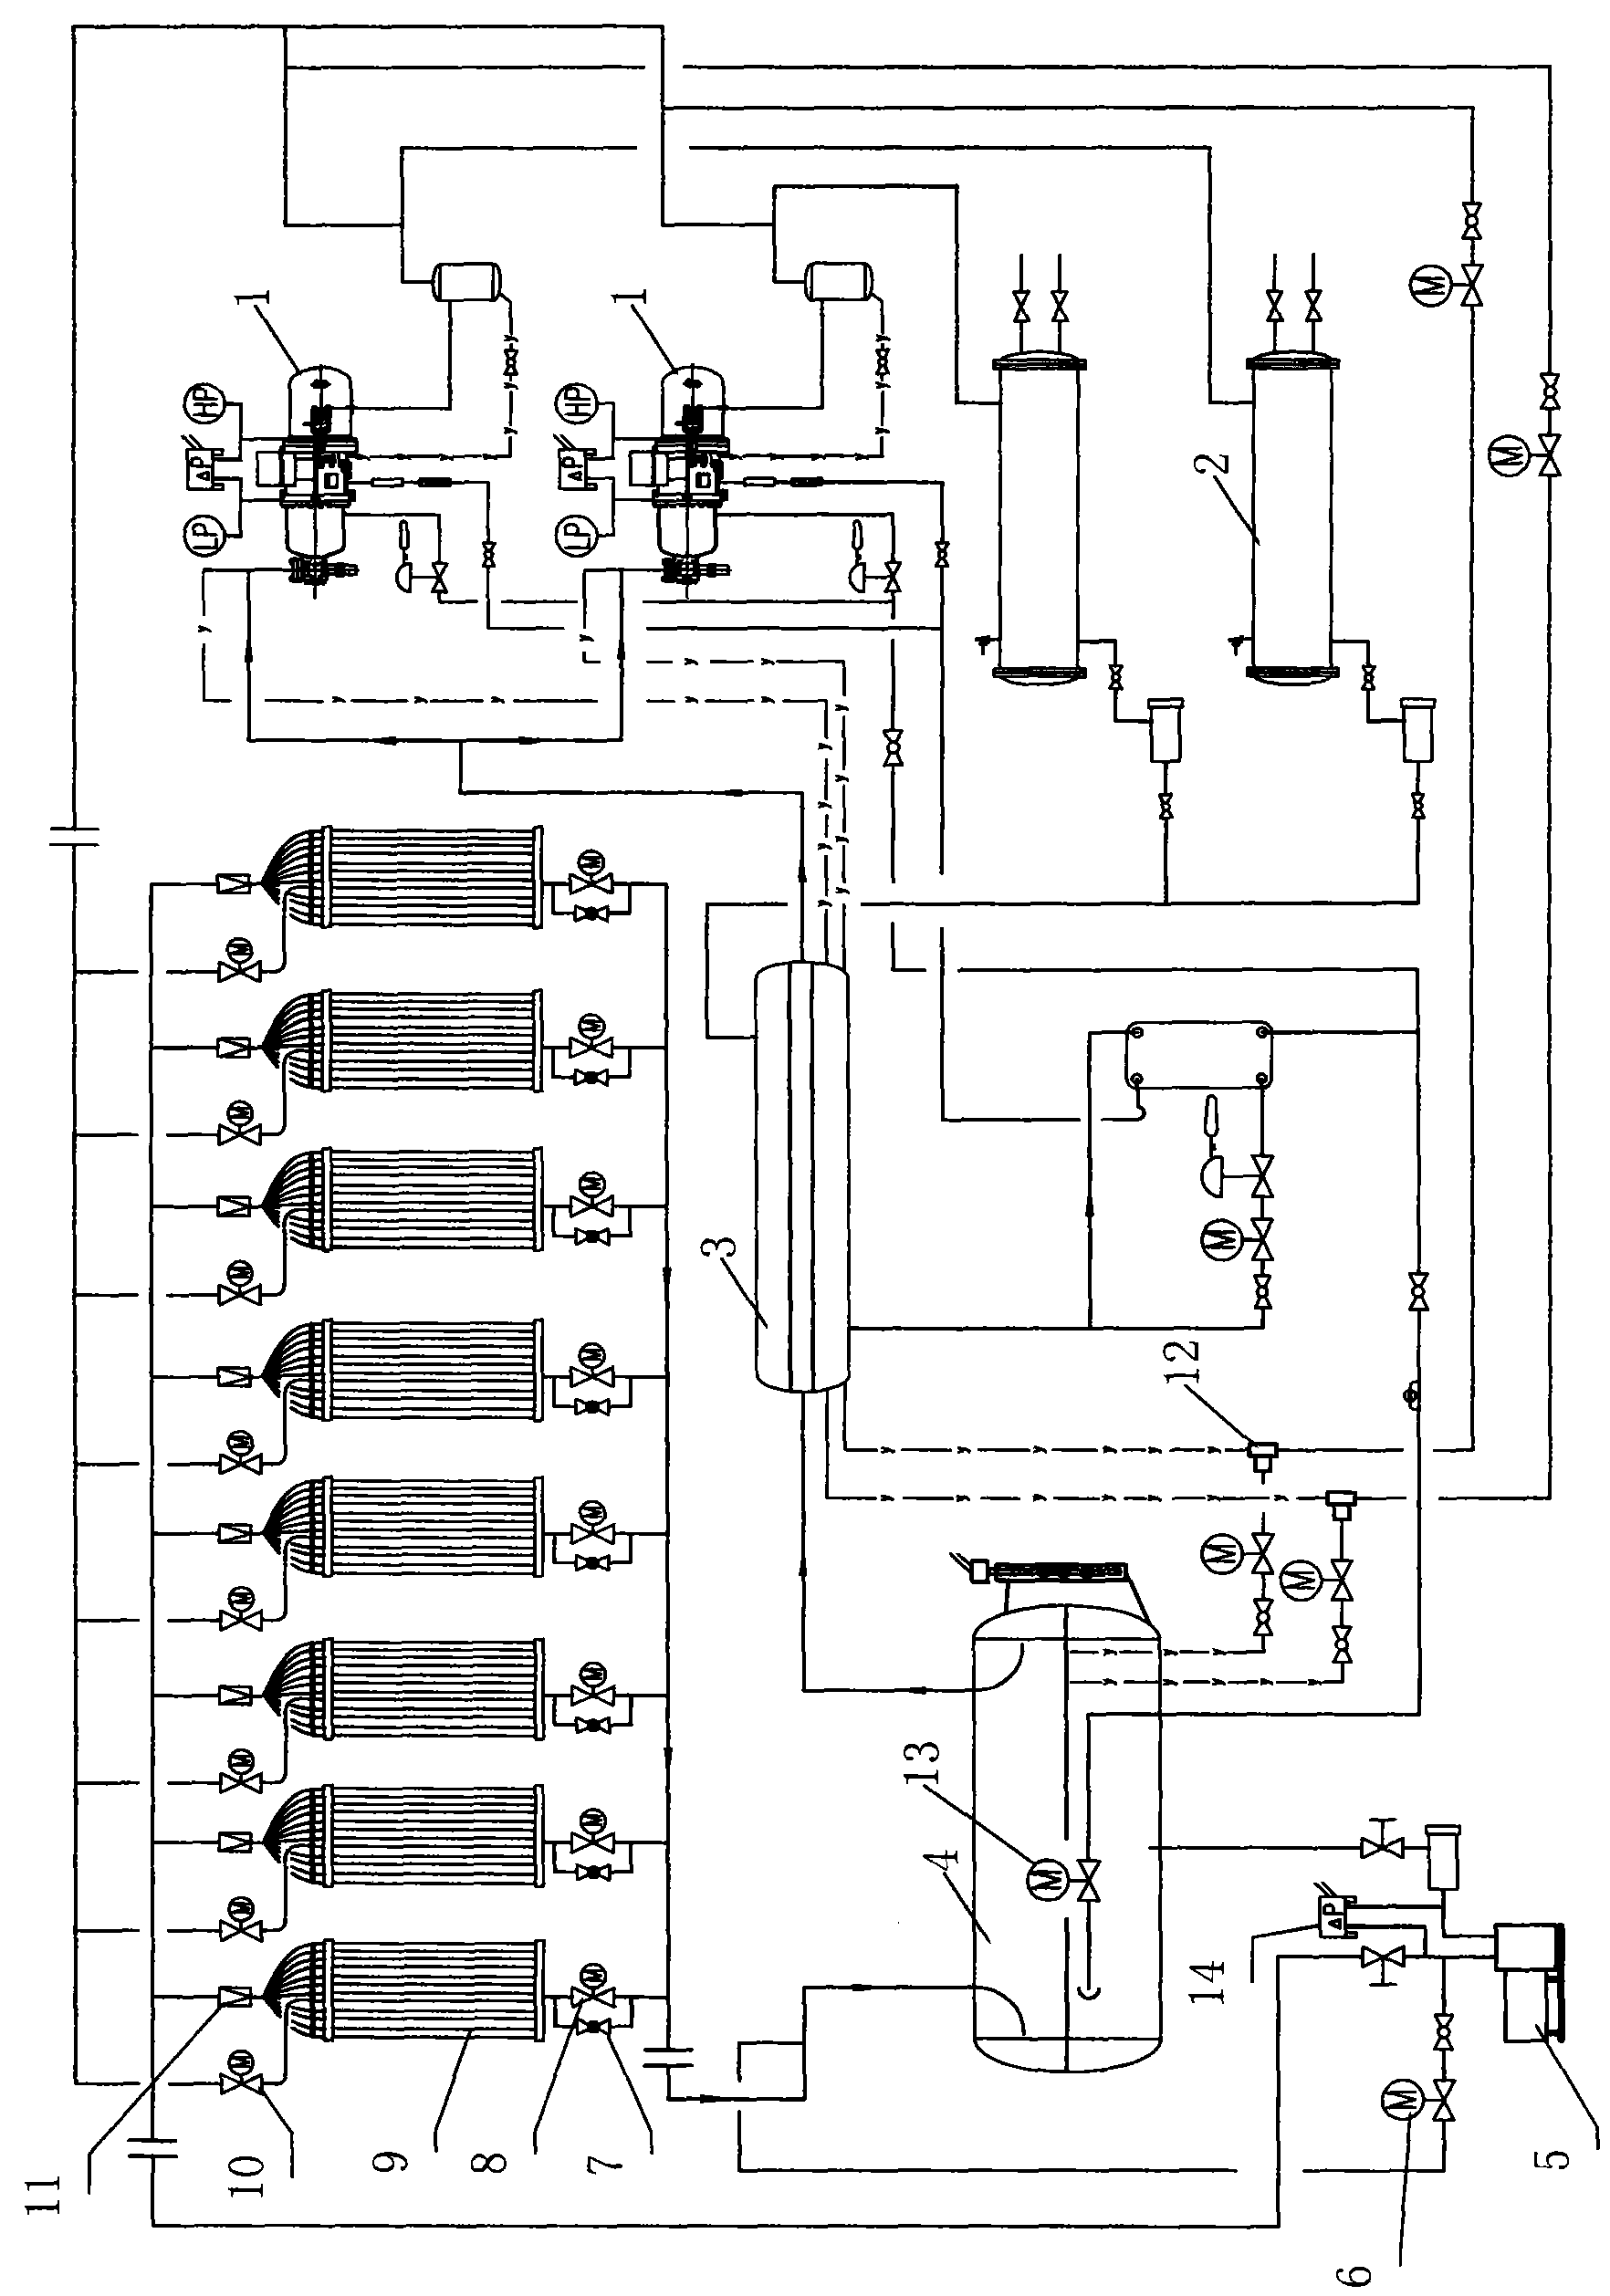 Dual working condition refrigeration system for making ice and cold water